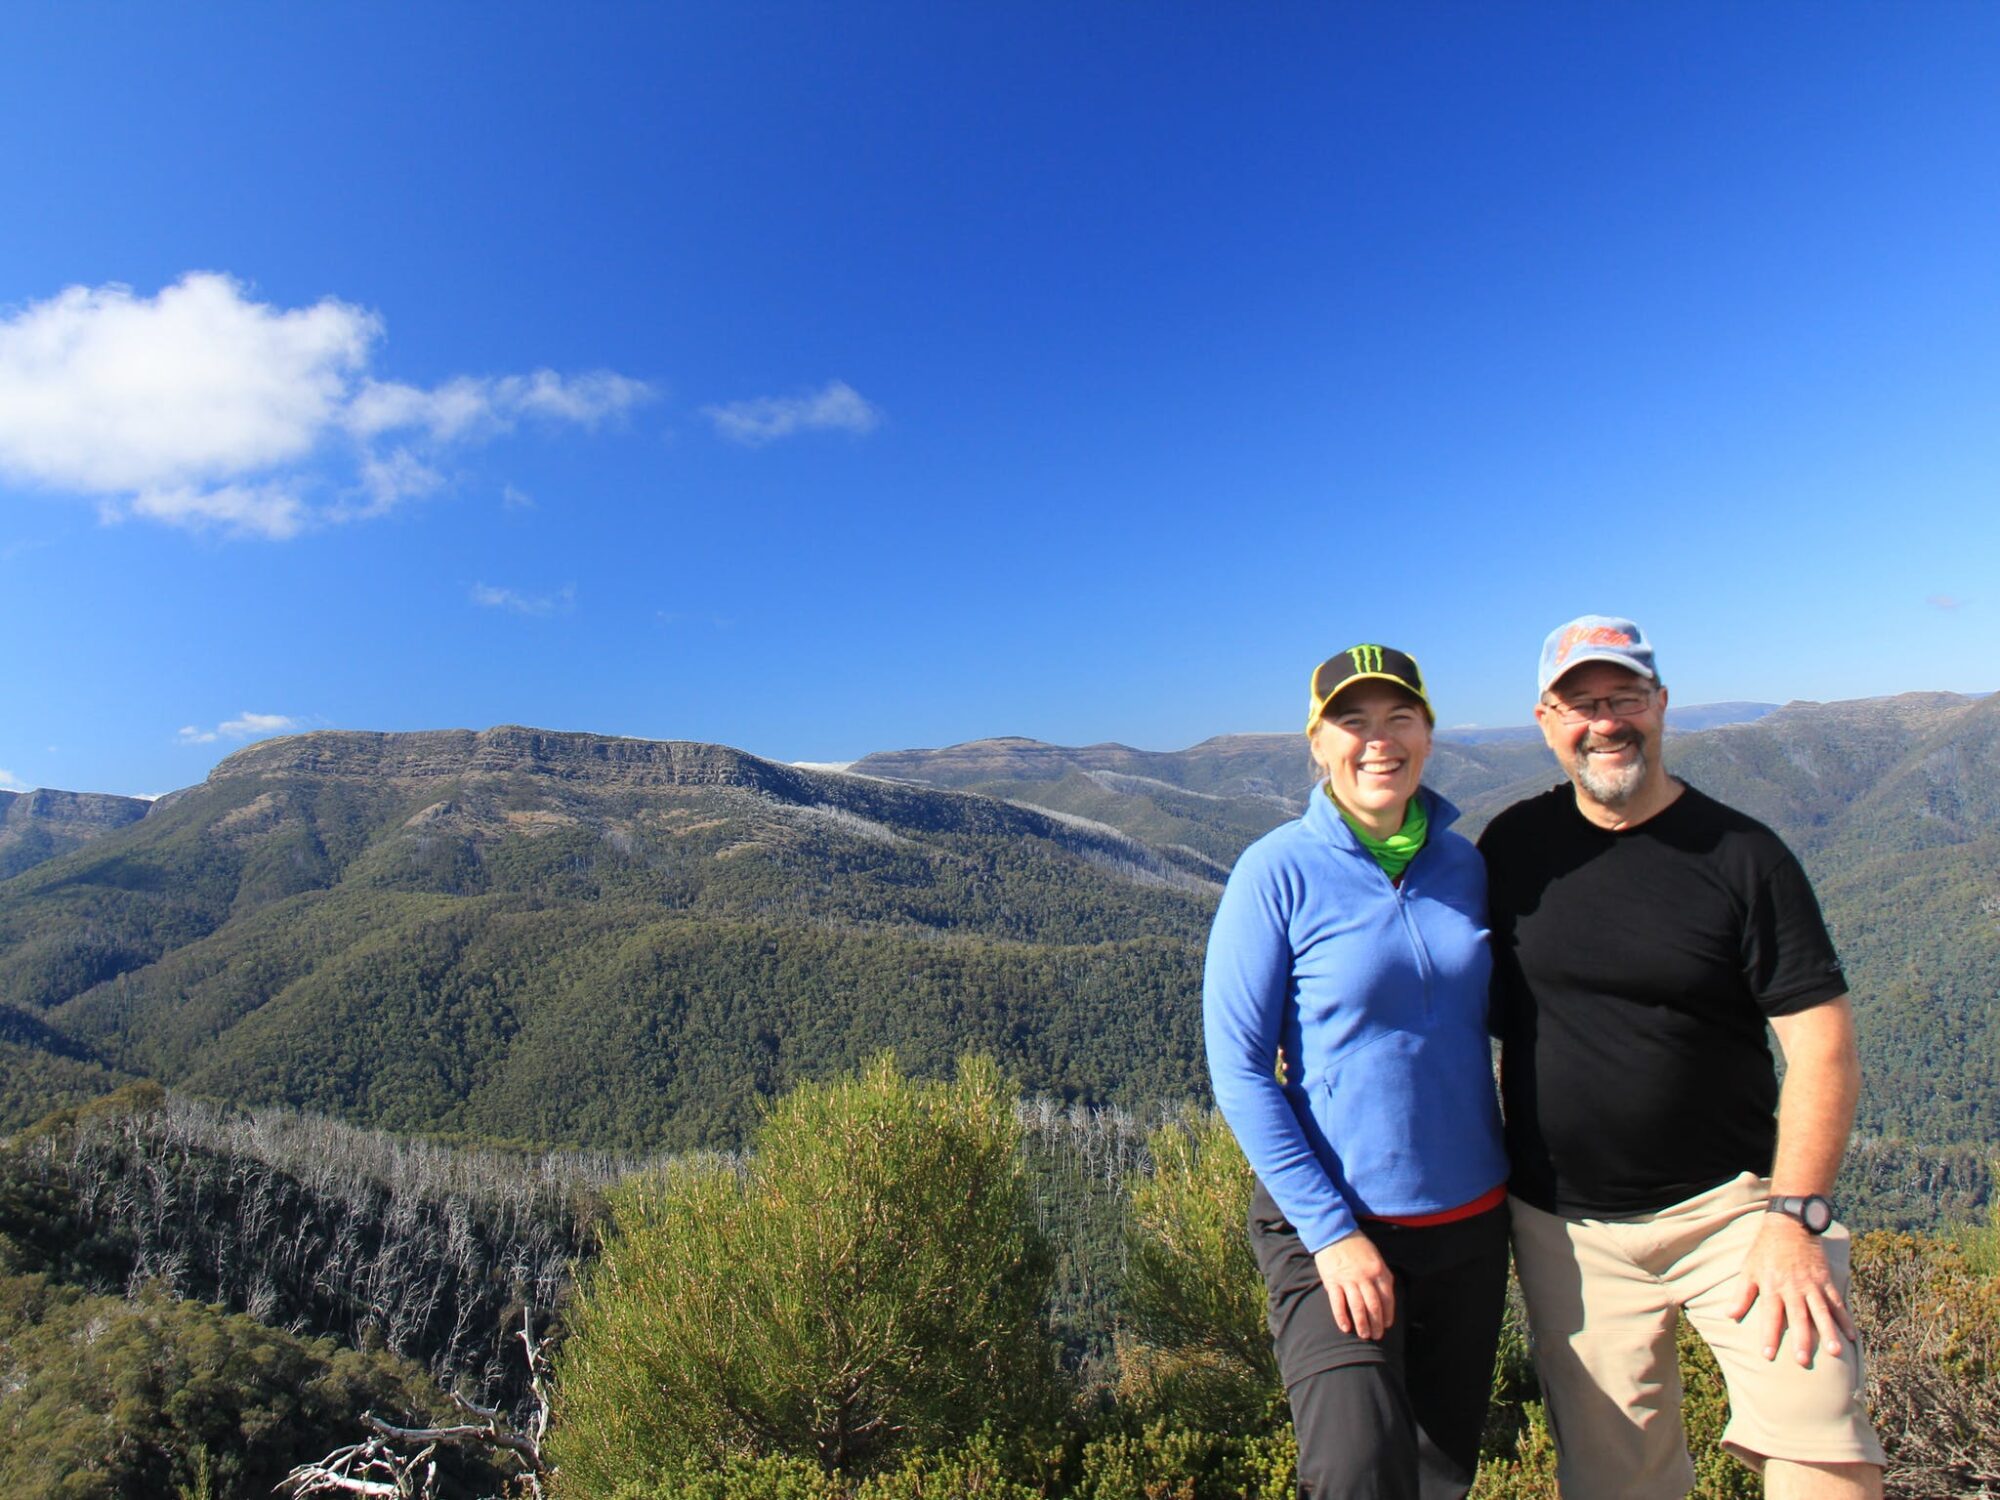 Your guide and base camp manager with The Bluff and Mt Eadley Stoney to the left.